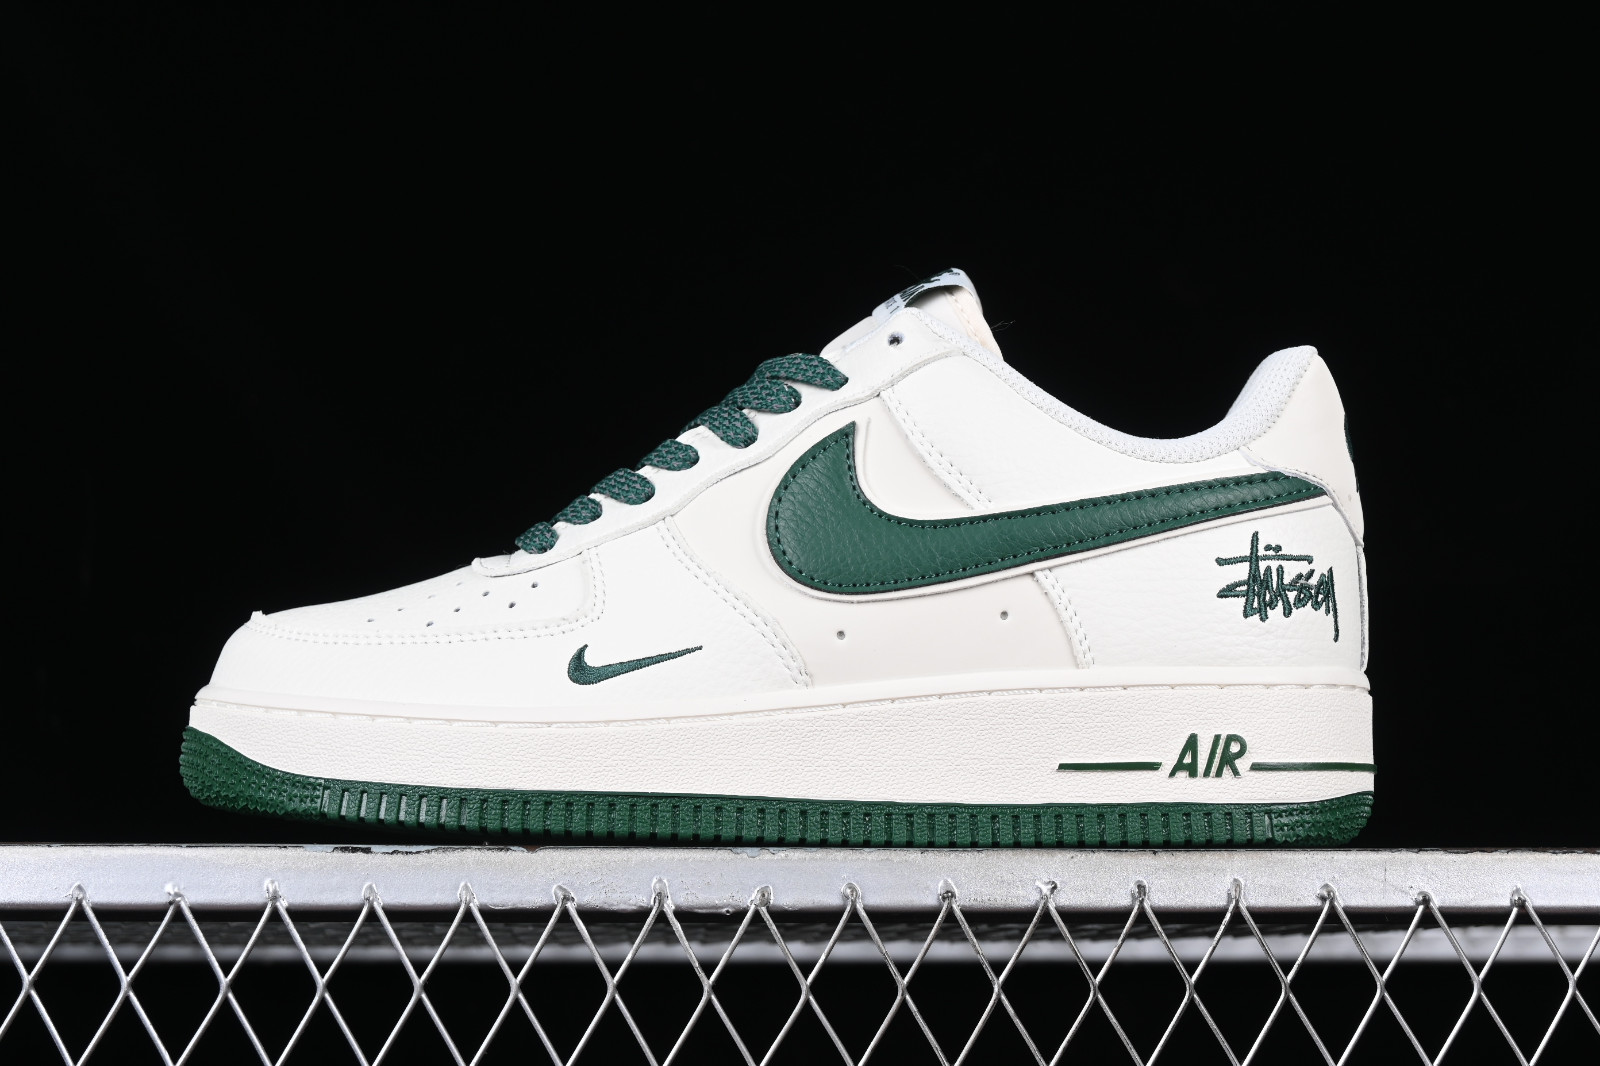 Nike Air Force 1 Low '07 LV8 Silver 2016